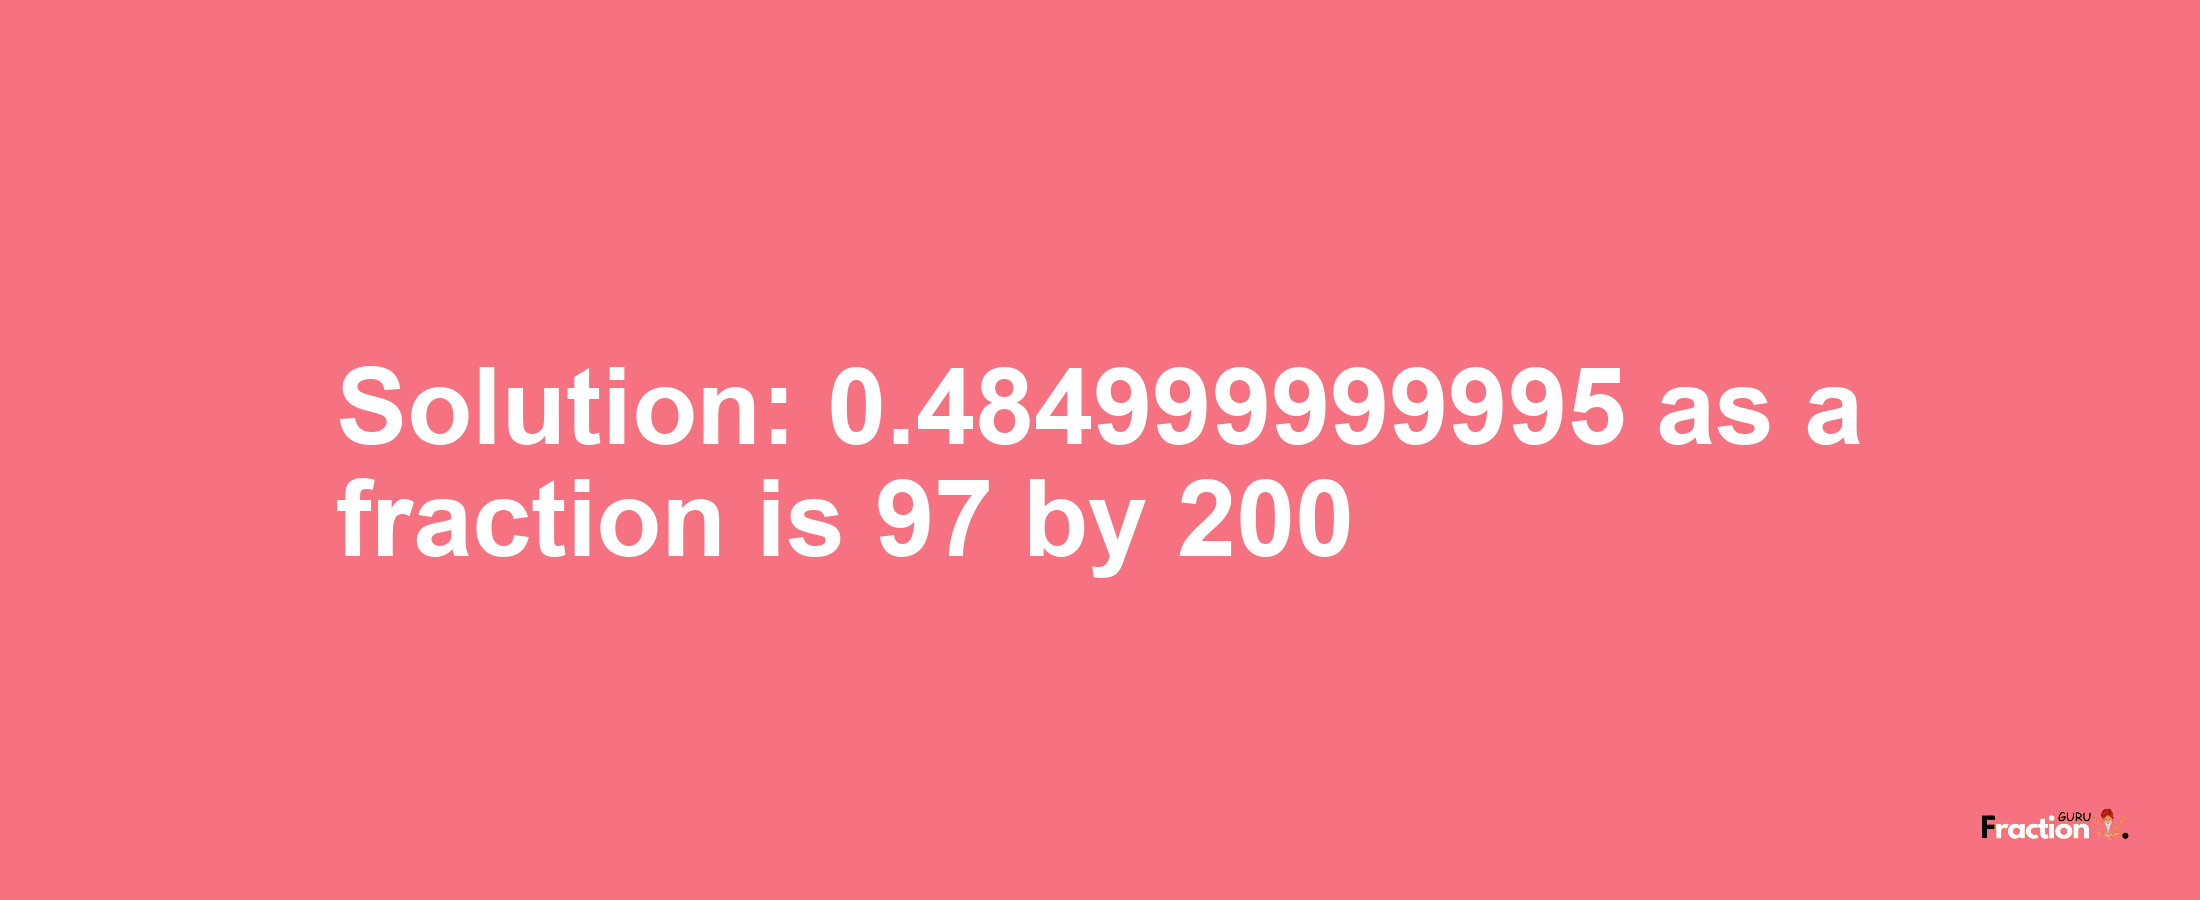 Solution:0.484999999995 as a fraction is 97/200